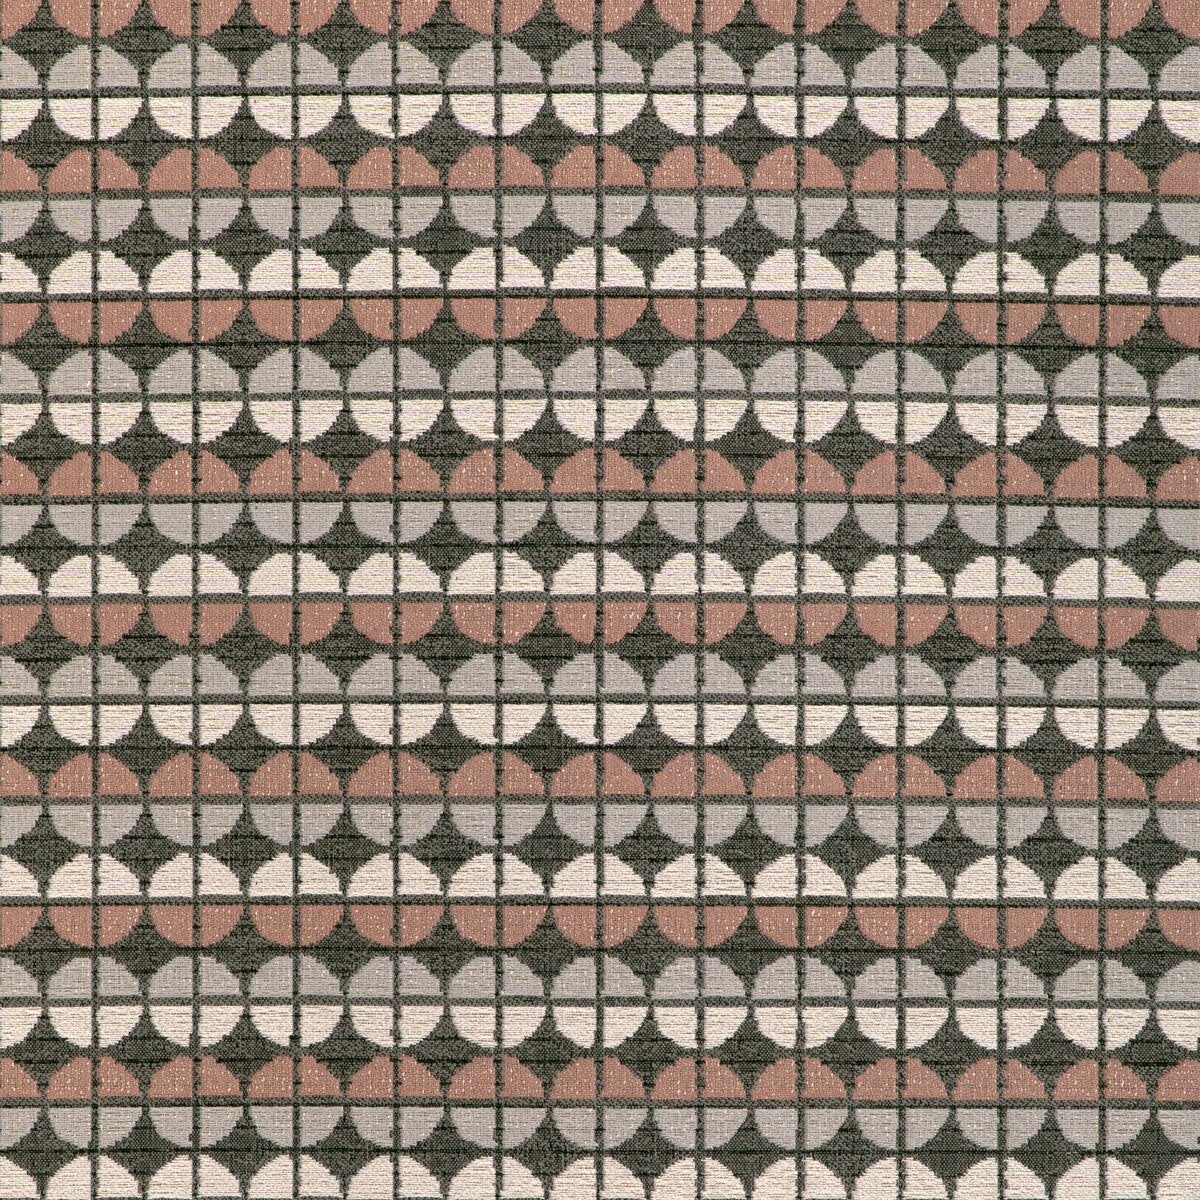 Decoy fabric in clay color - pattern 37051.1211.0 - by Kravet Contract in the Chesapeake collection